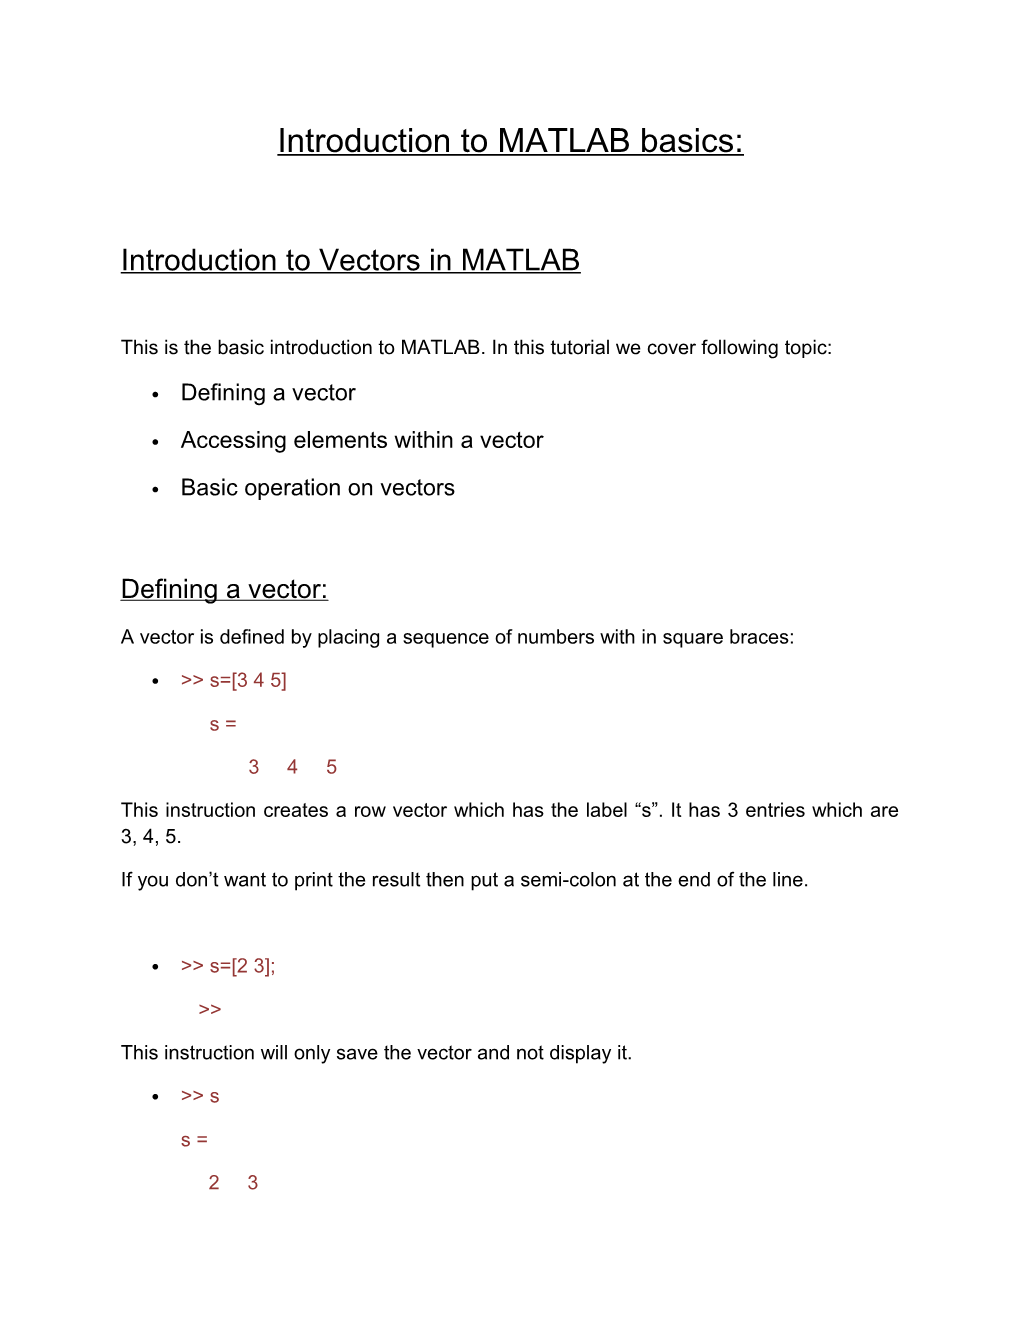 This Is the Basic Introduction to MATLAB. in This Tutorial We Cover Following Topic